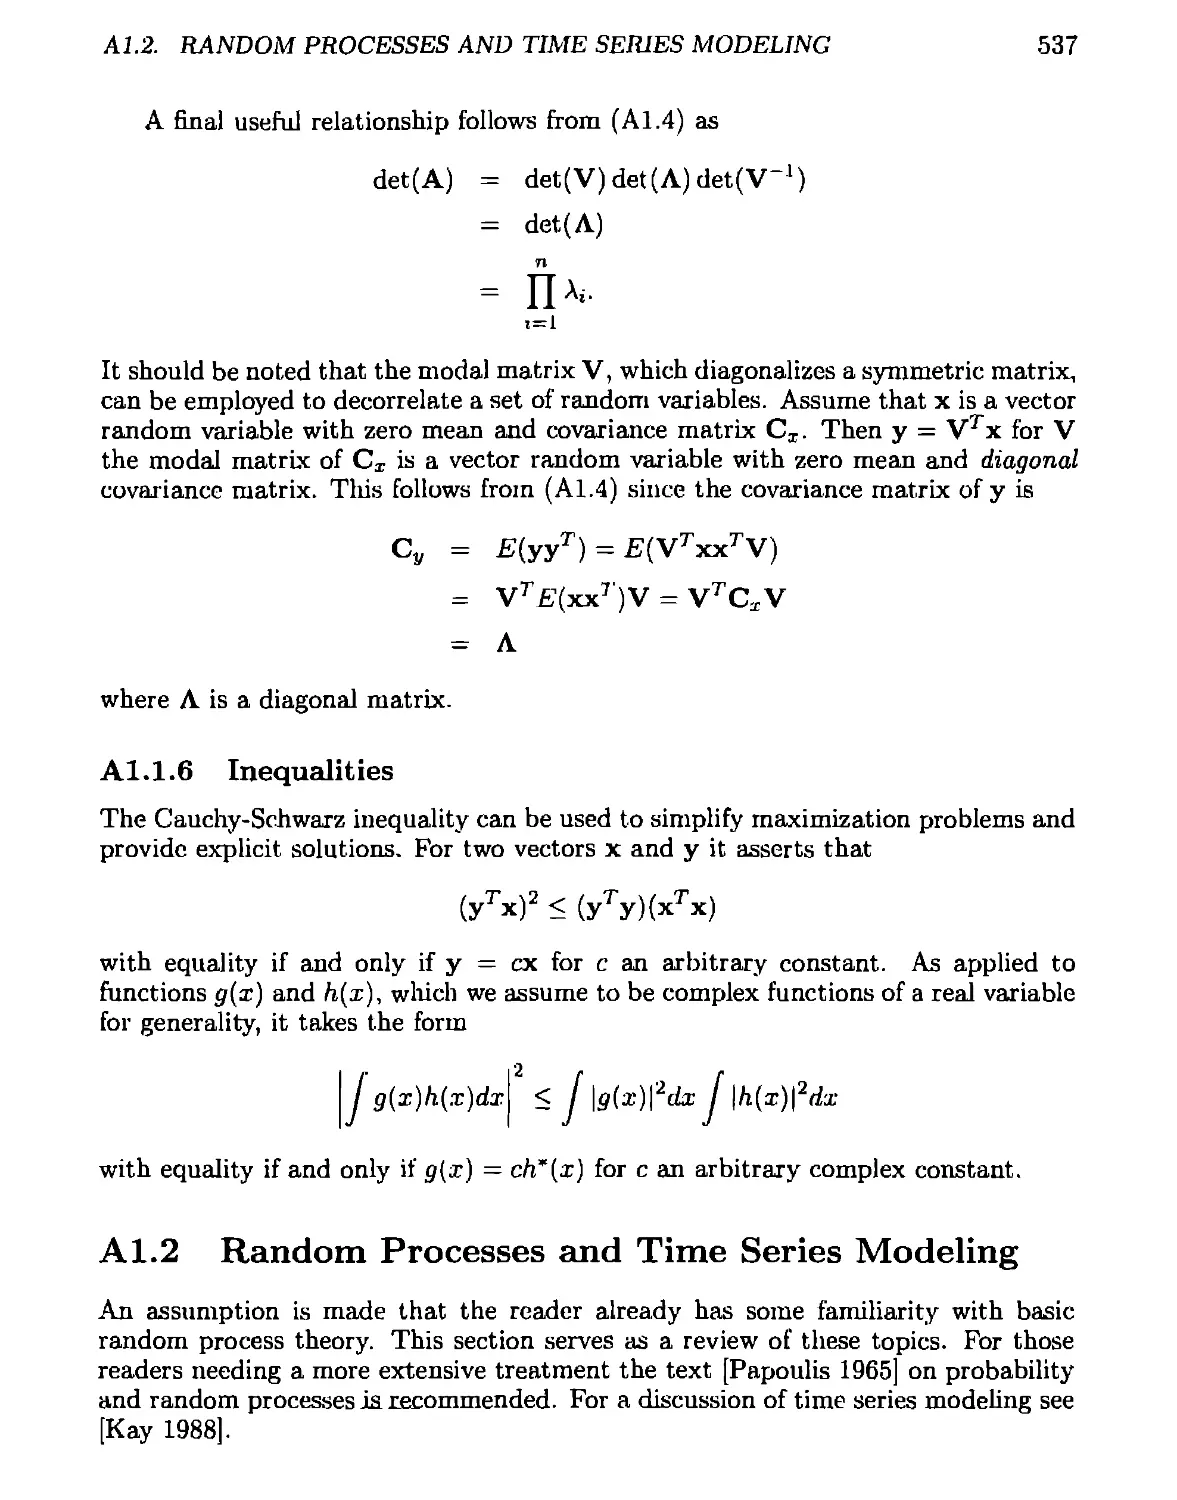 A.1.1.6 Inequalities
A.1.2 Random Processes and Time Series Modeling